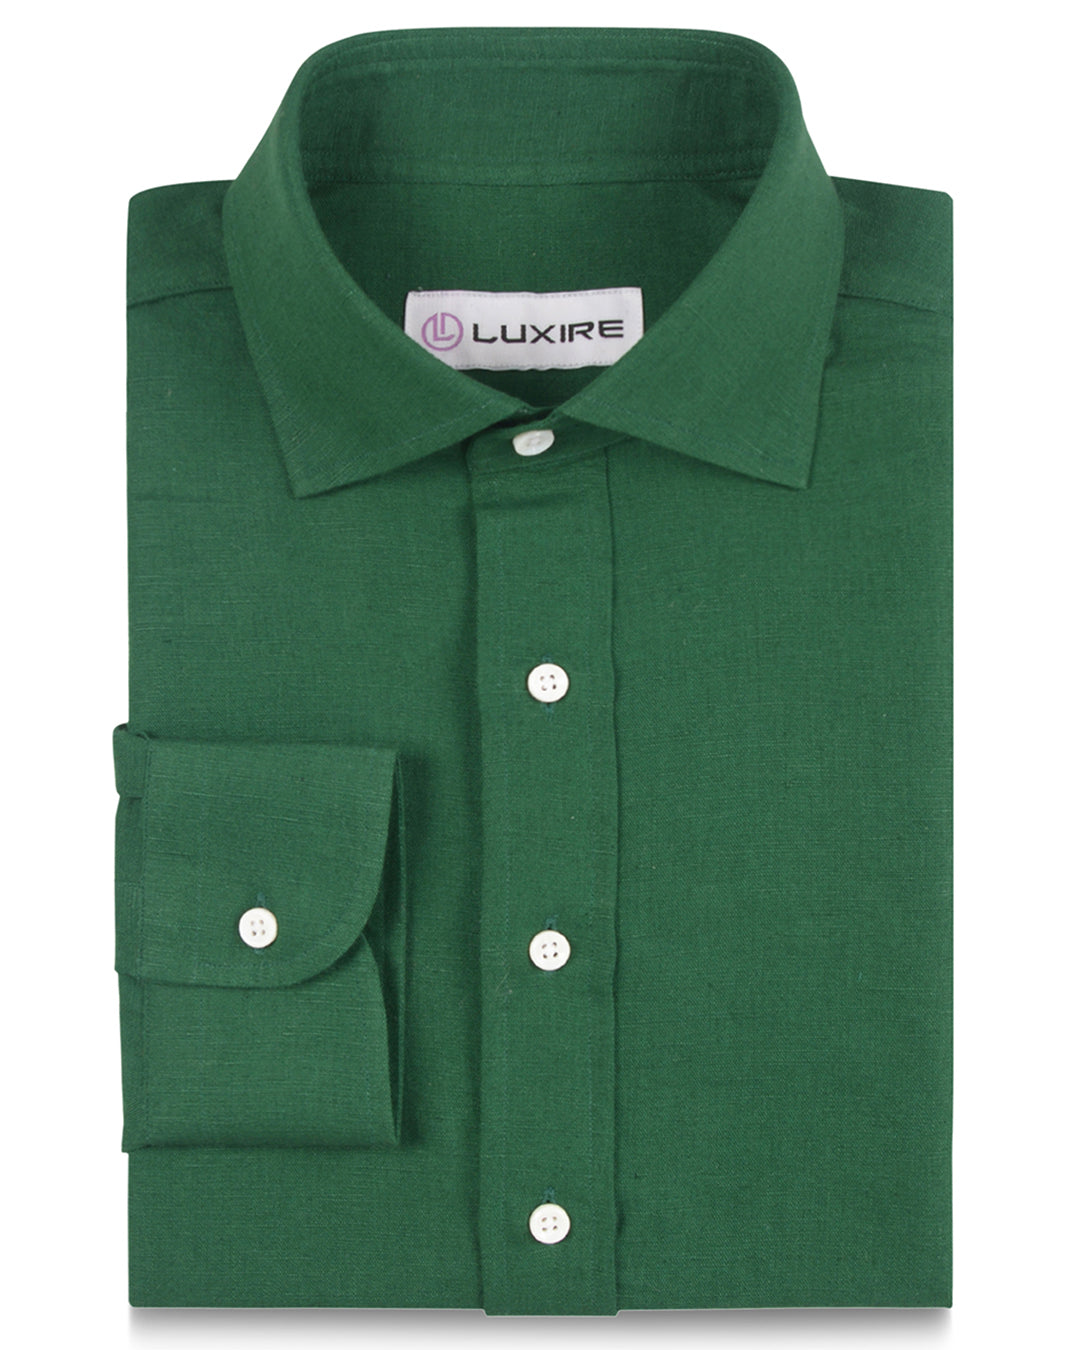 Front of custom linen shirt for men in forrest green by Luxire Clothing